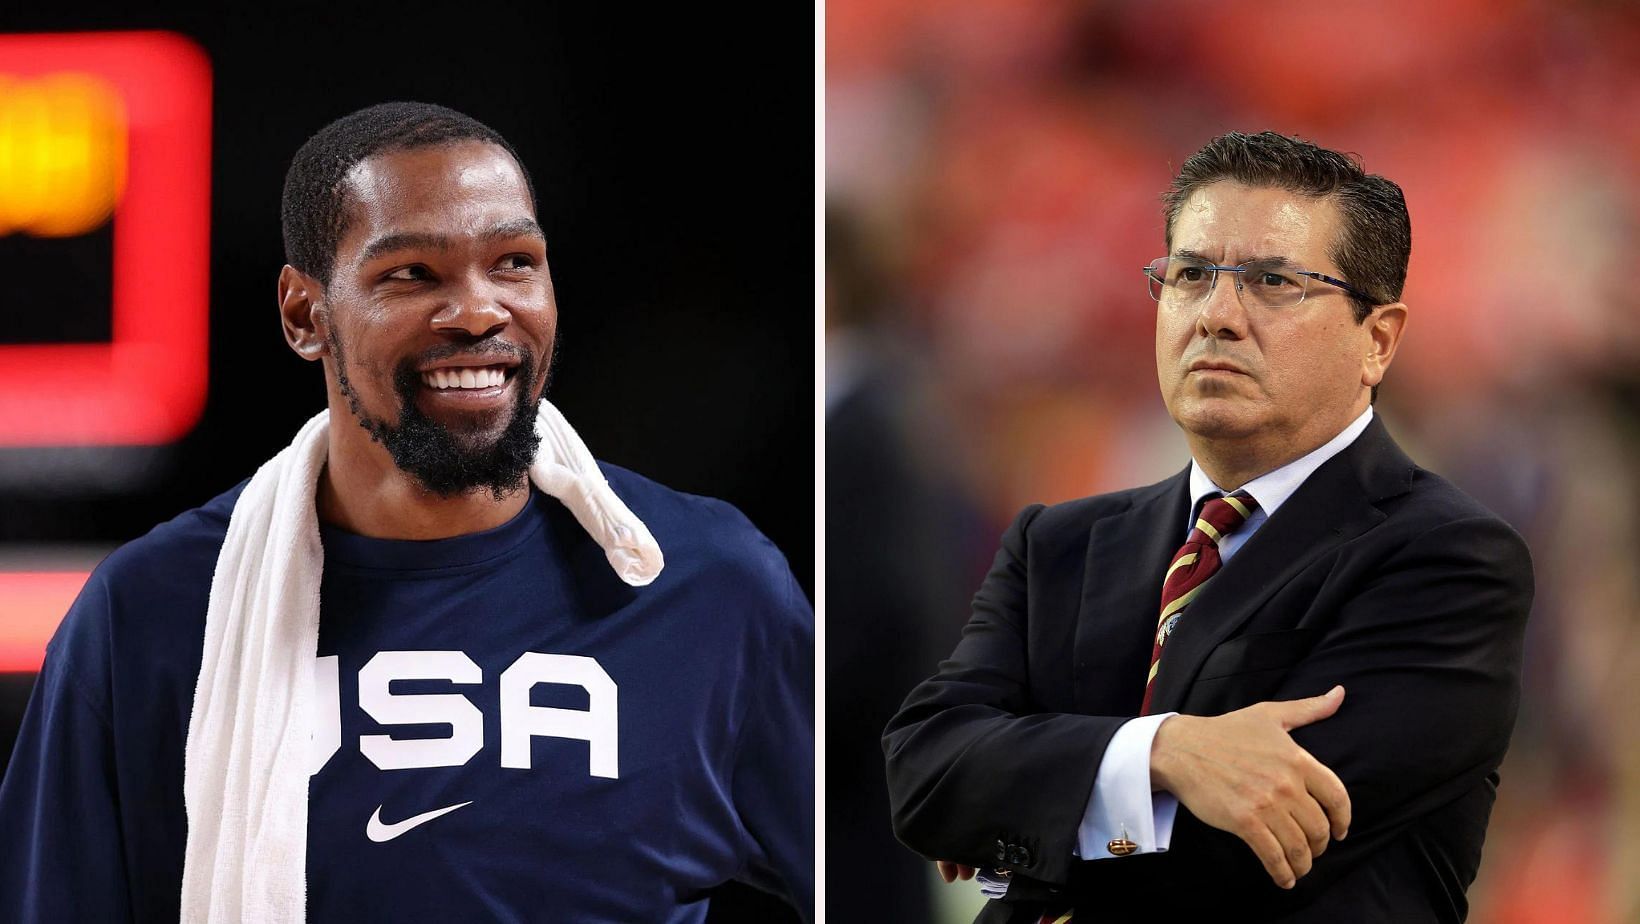 Kevin Durant aiming to be part of Washington Commanders ownership group